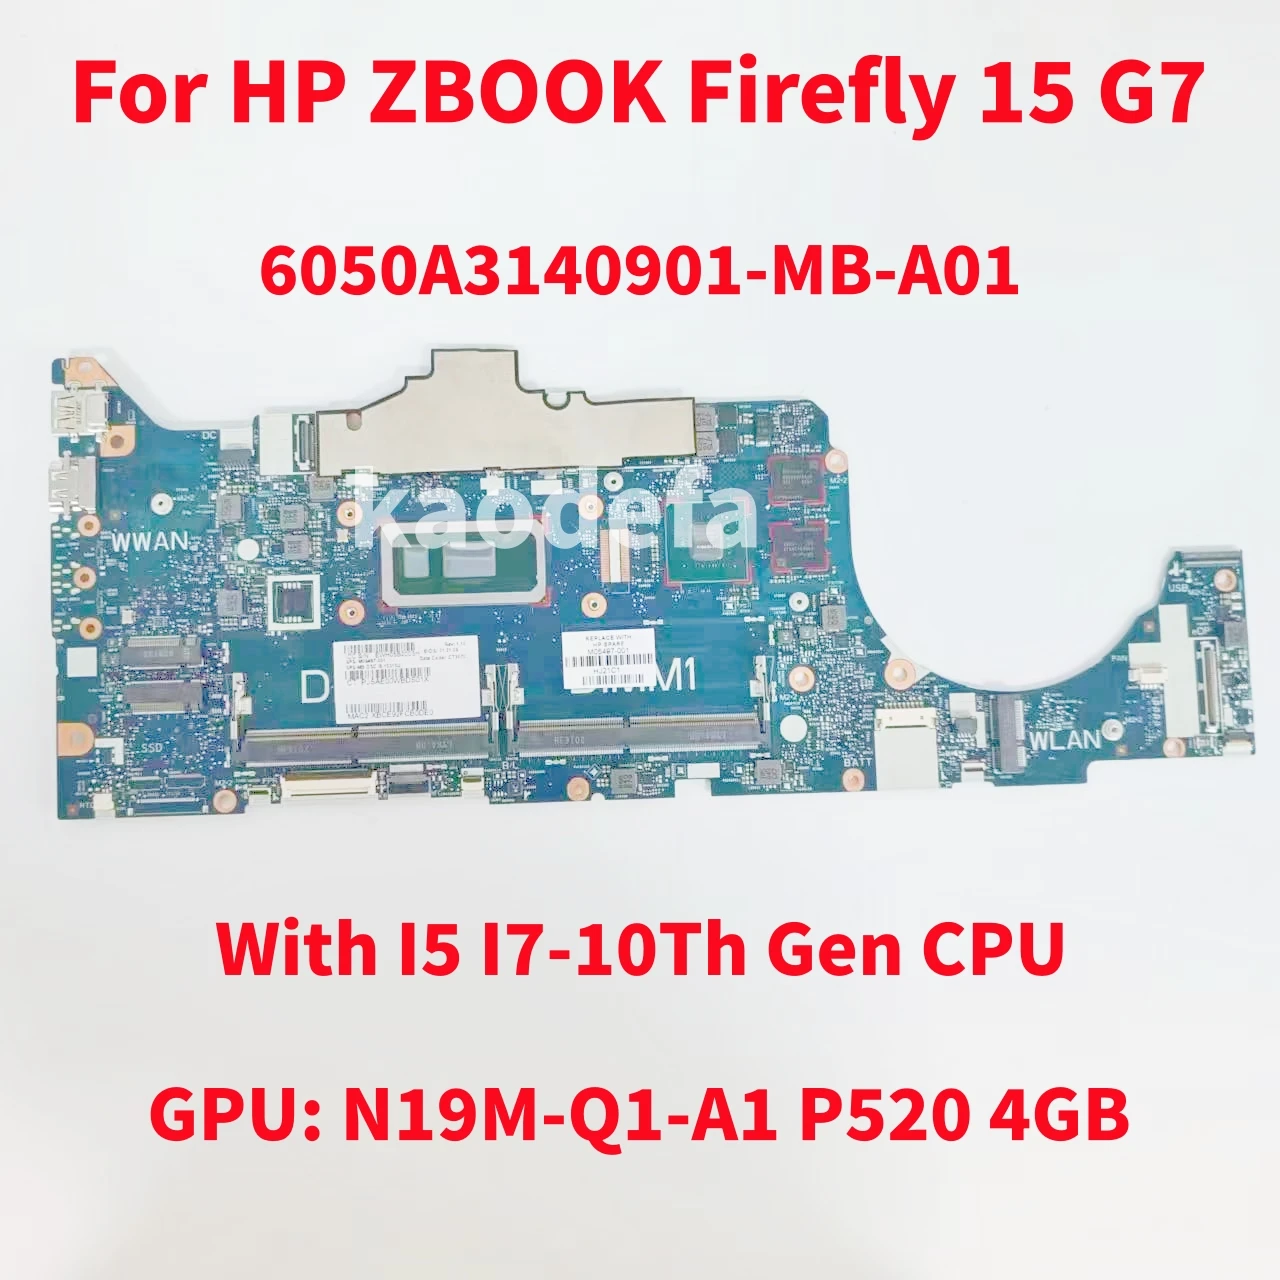 

6050A3140901-MB-A01 For HP ZBOOK 15 G7 Laptop Motherboard With I5 I7-10Th Gen CPU GPU: N19M-Q1-A1 P520 4GB M05497-001 M05496-001